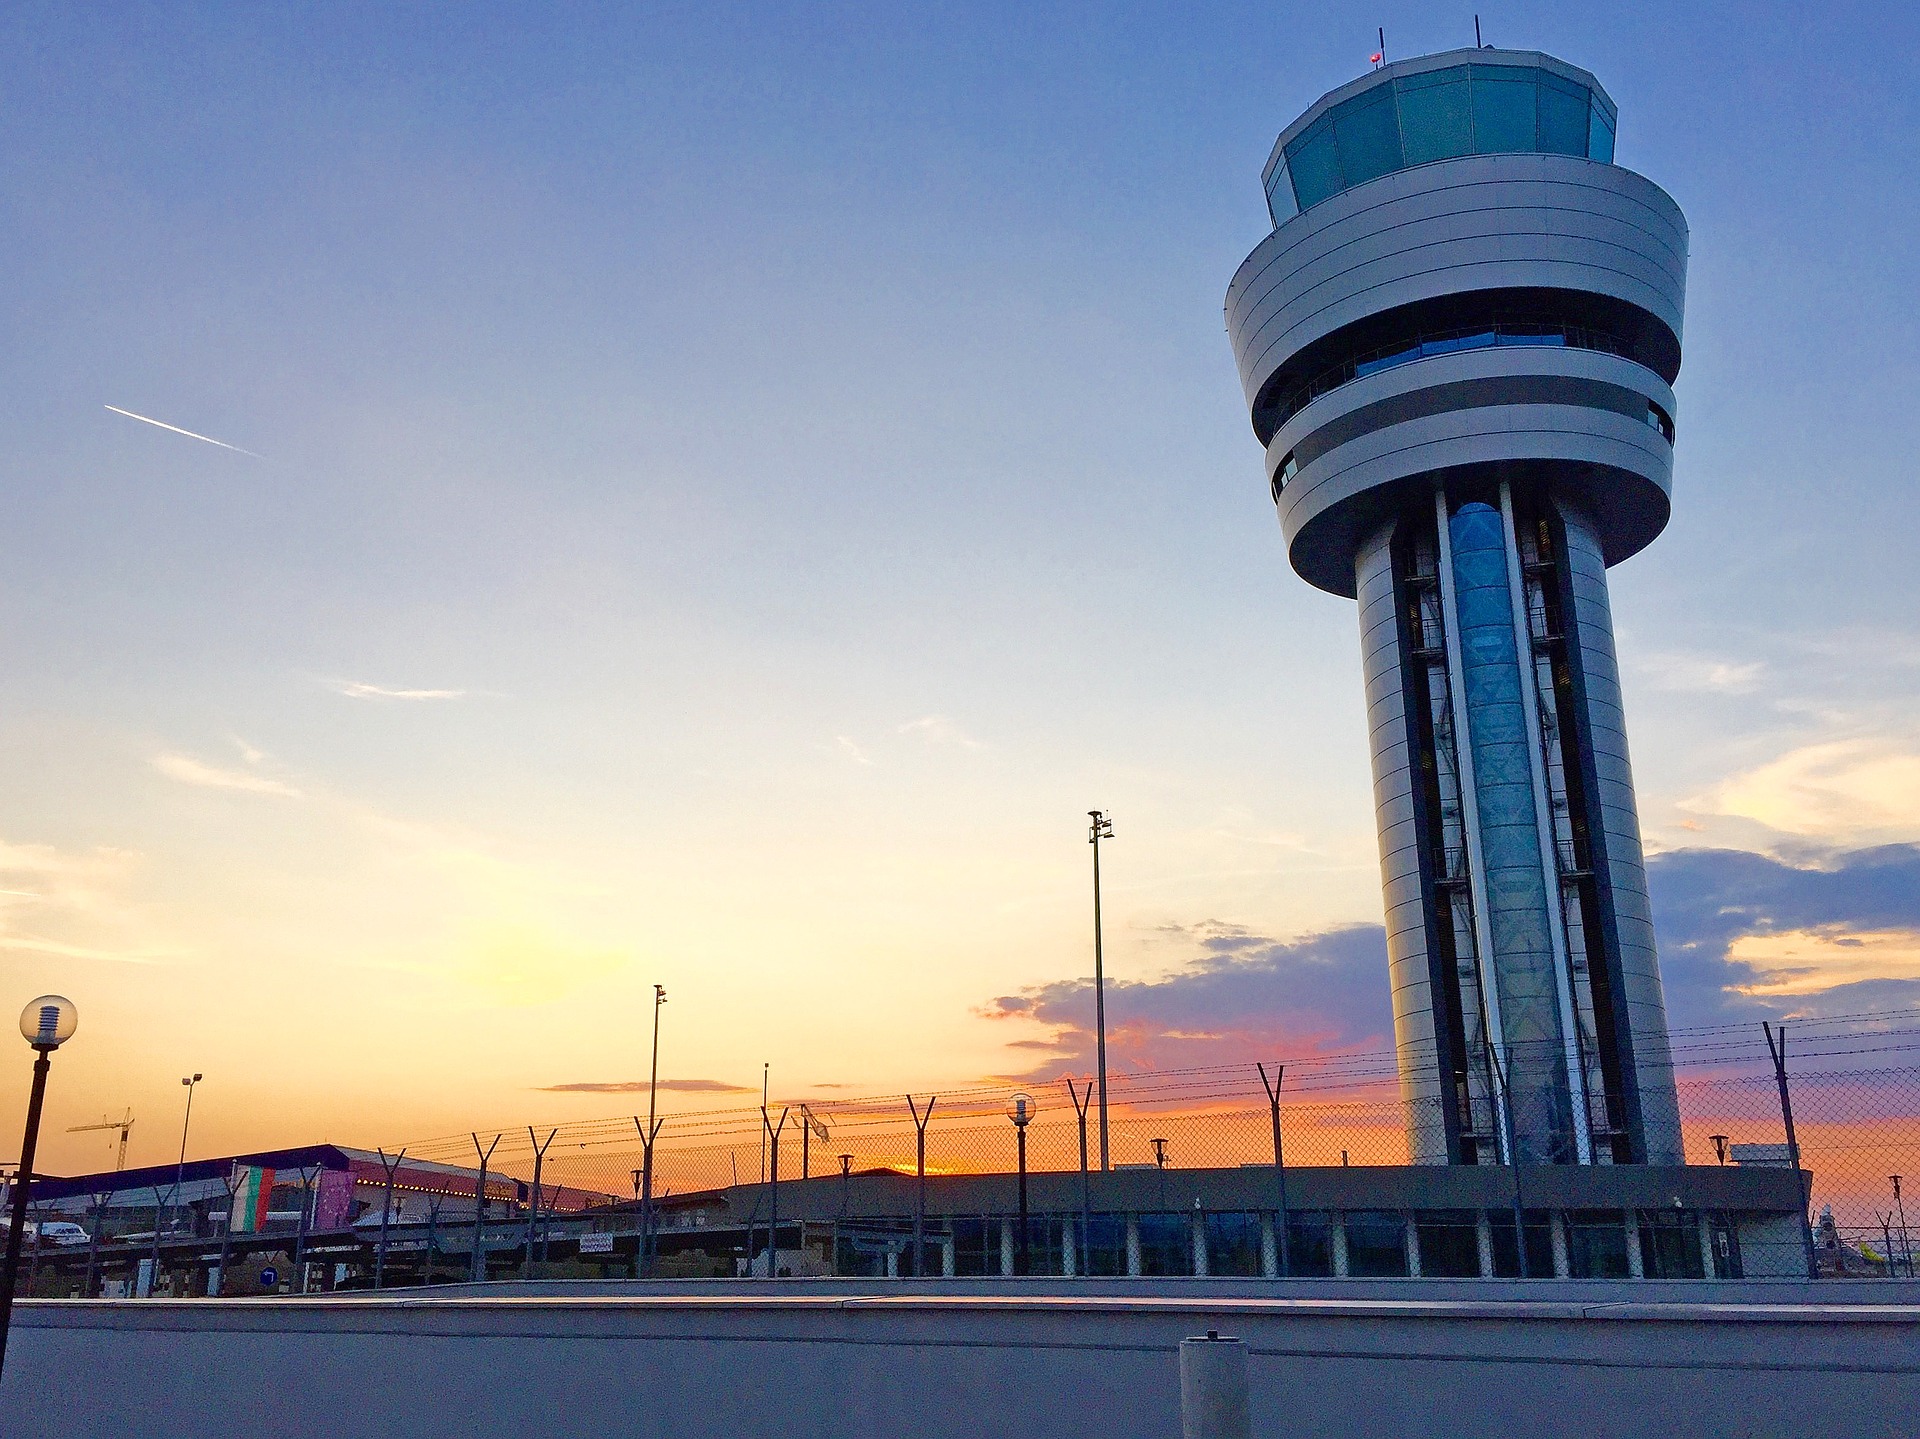 Air traffic control tower in an airport